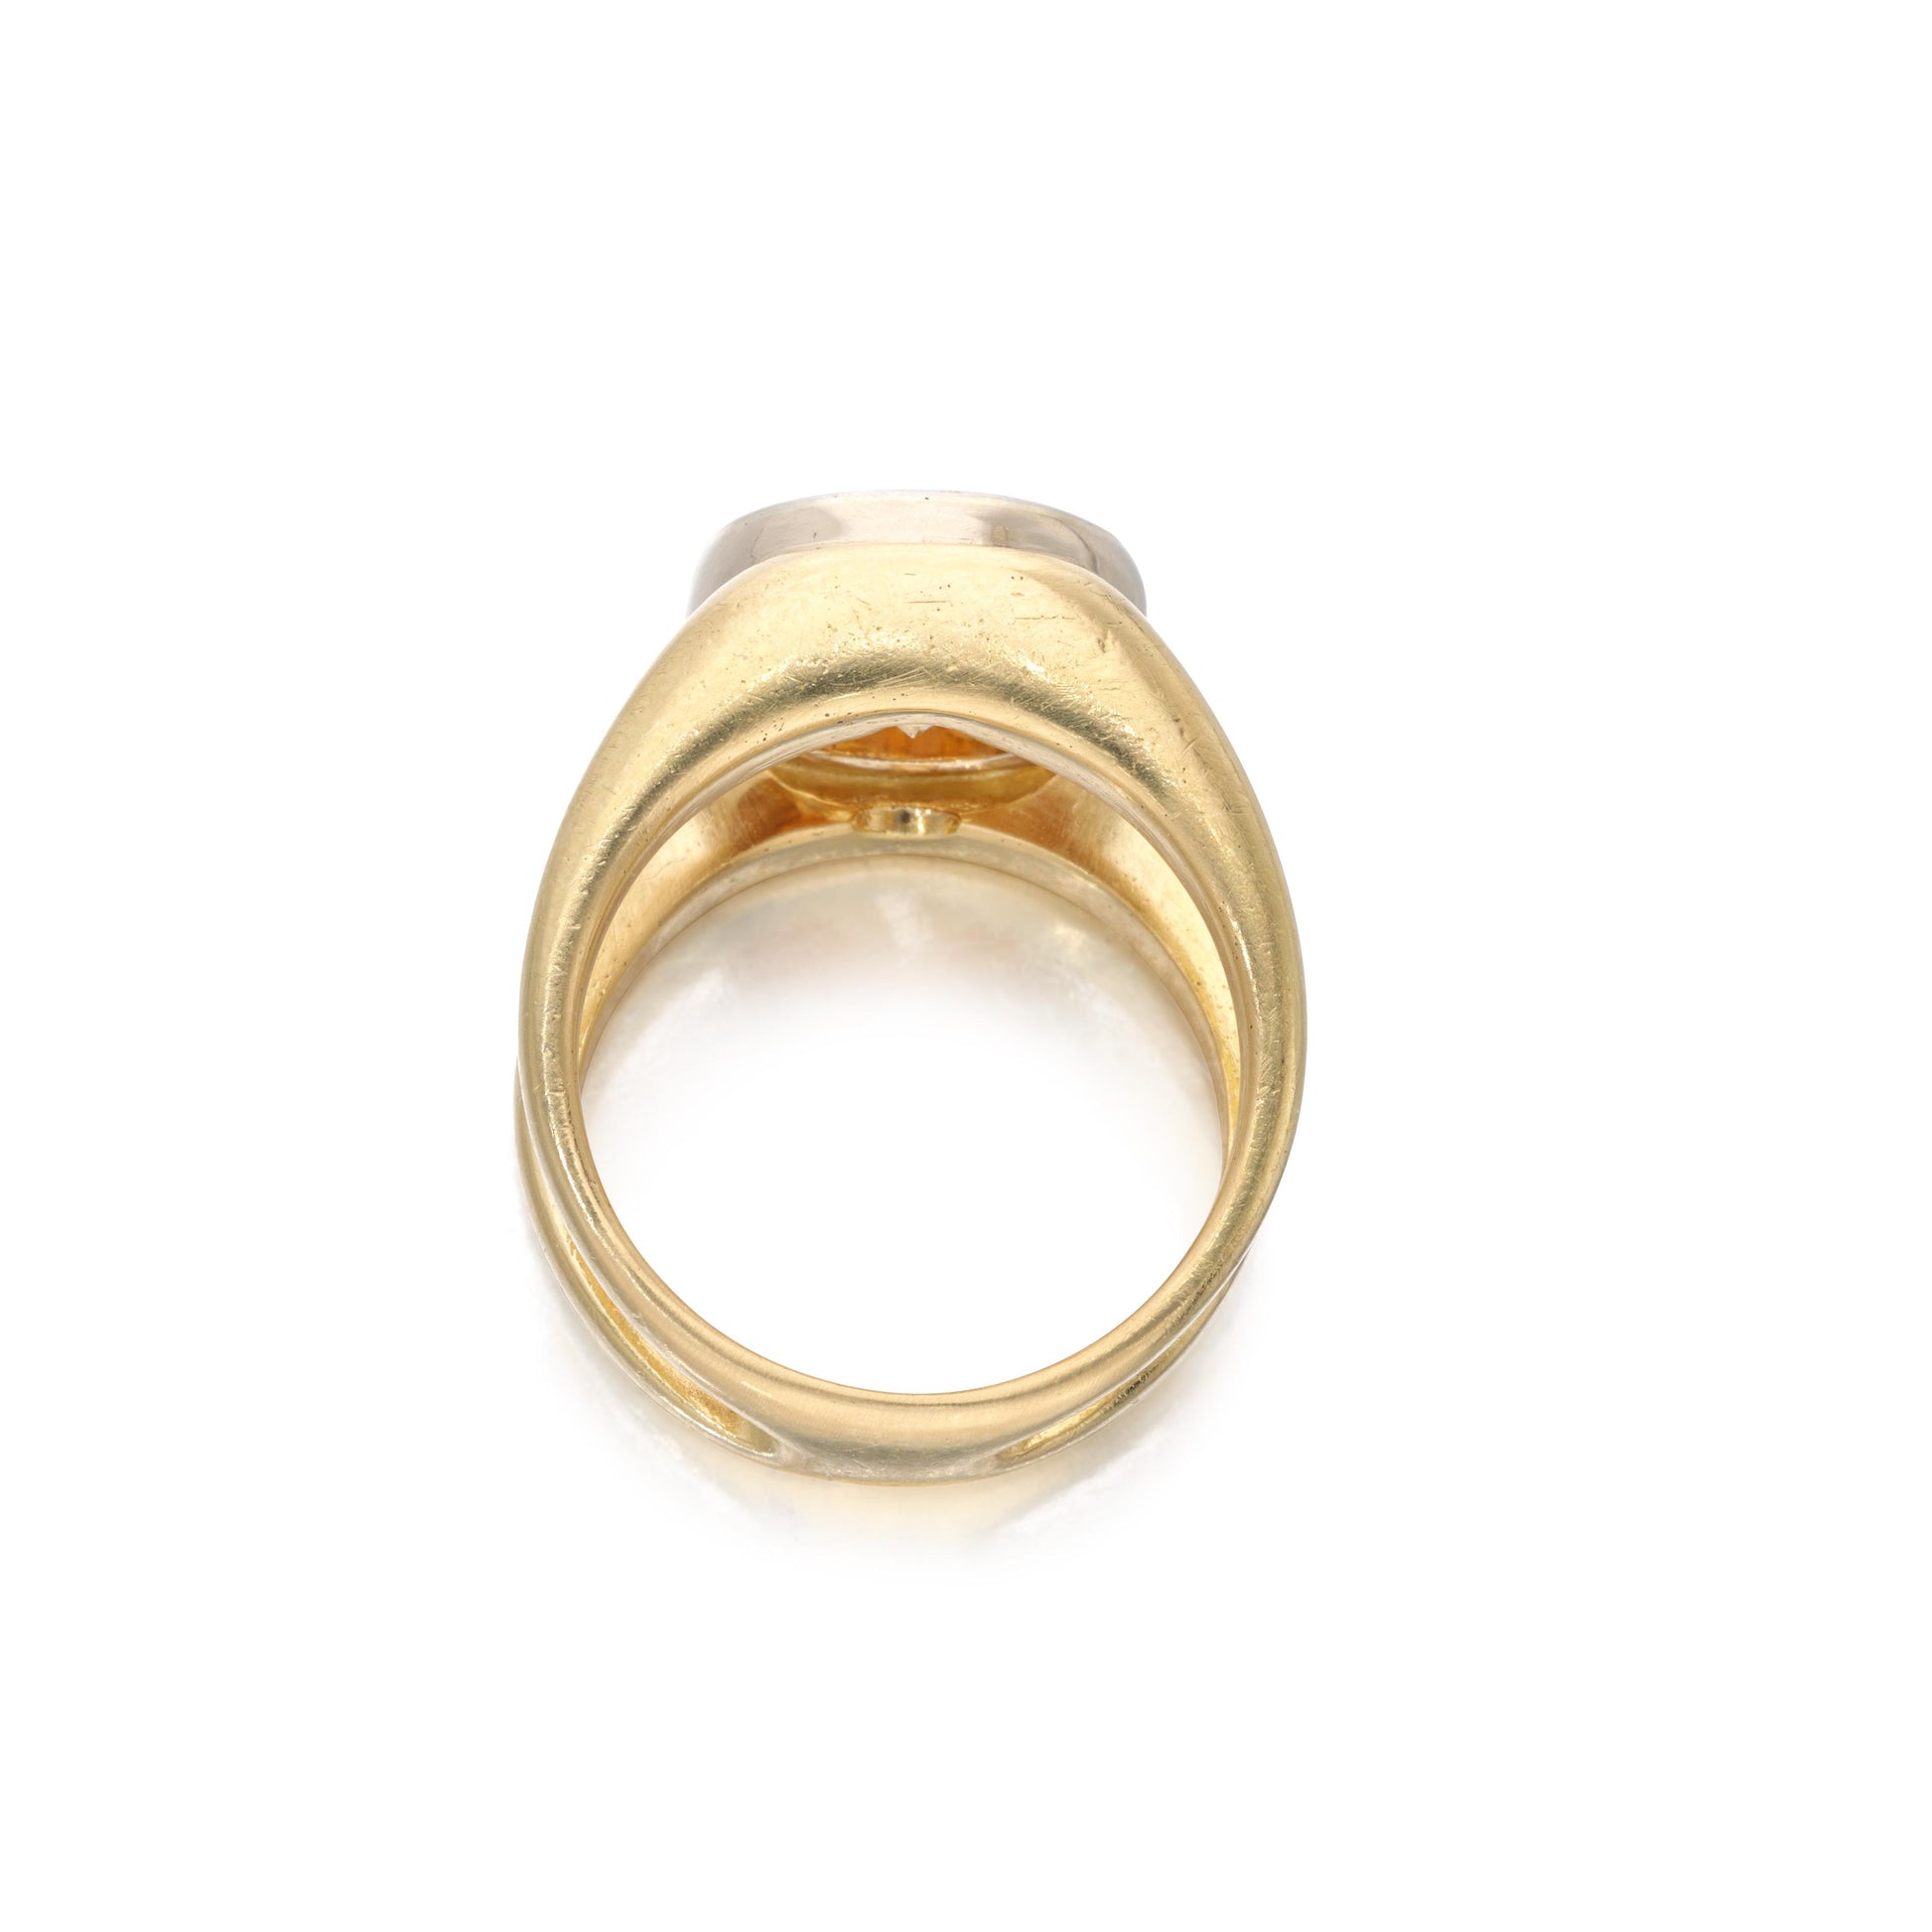 4.01 champagne diamond in yellow gold ring